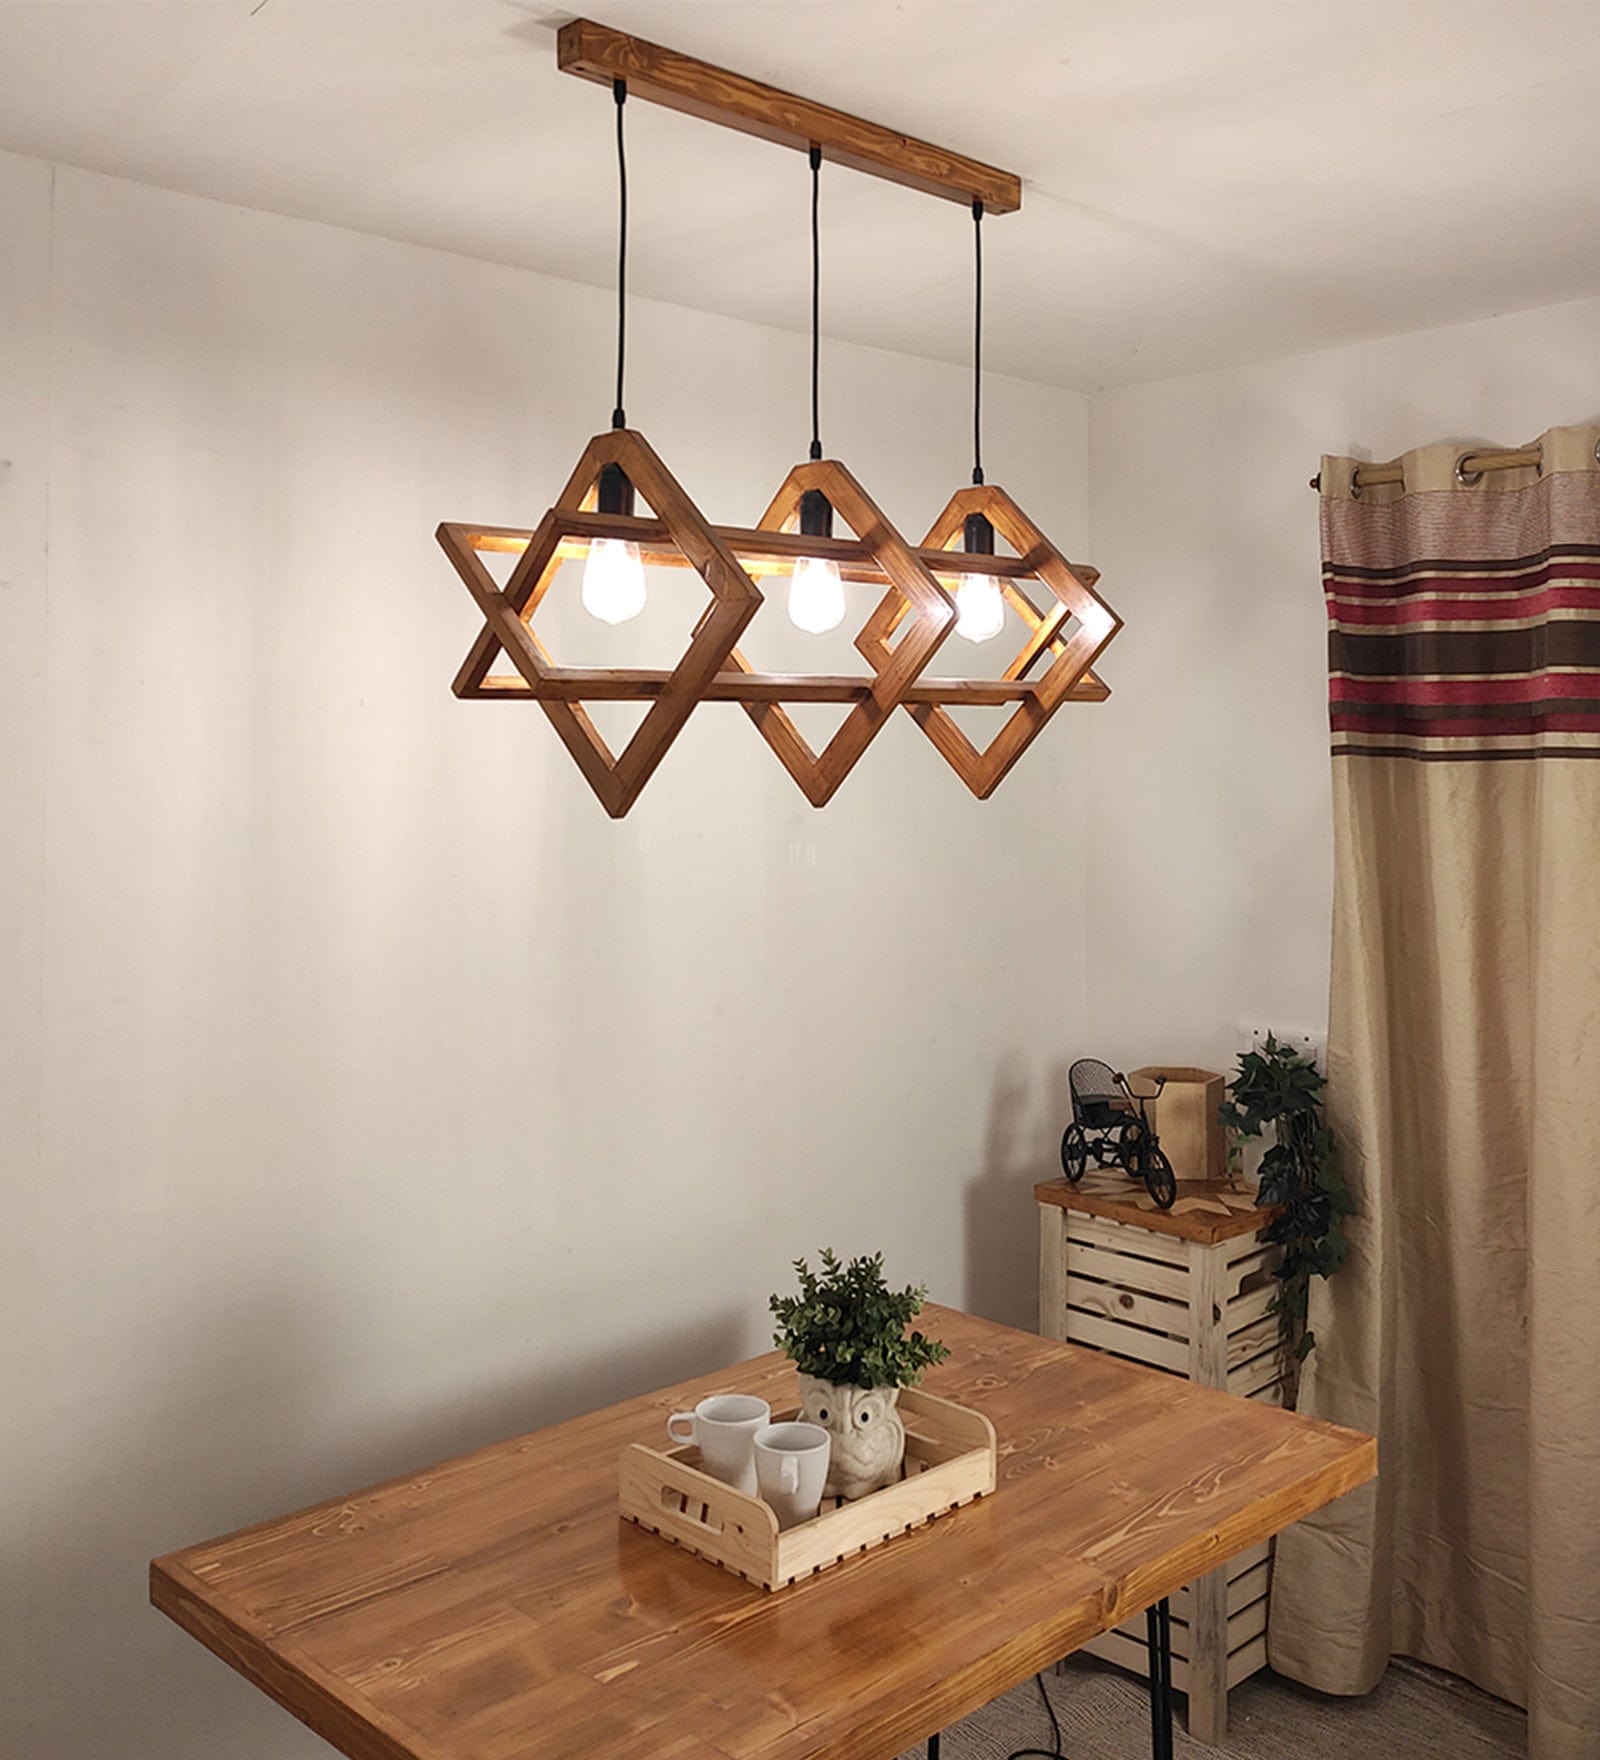 Paragon Brown 3 Series Hanging Lamp (BULB NOT INCLUDED)